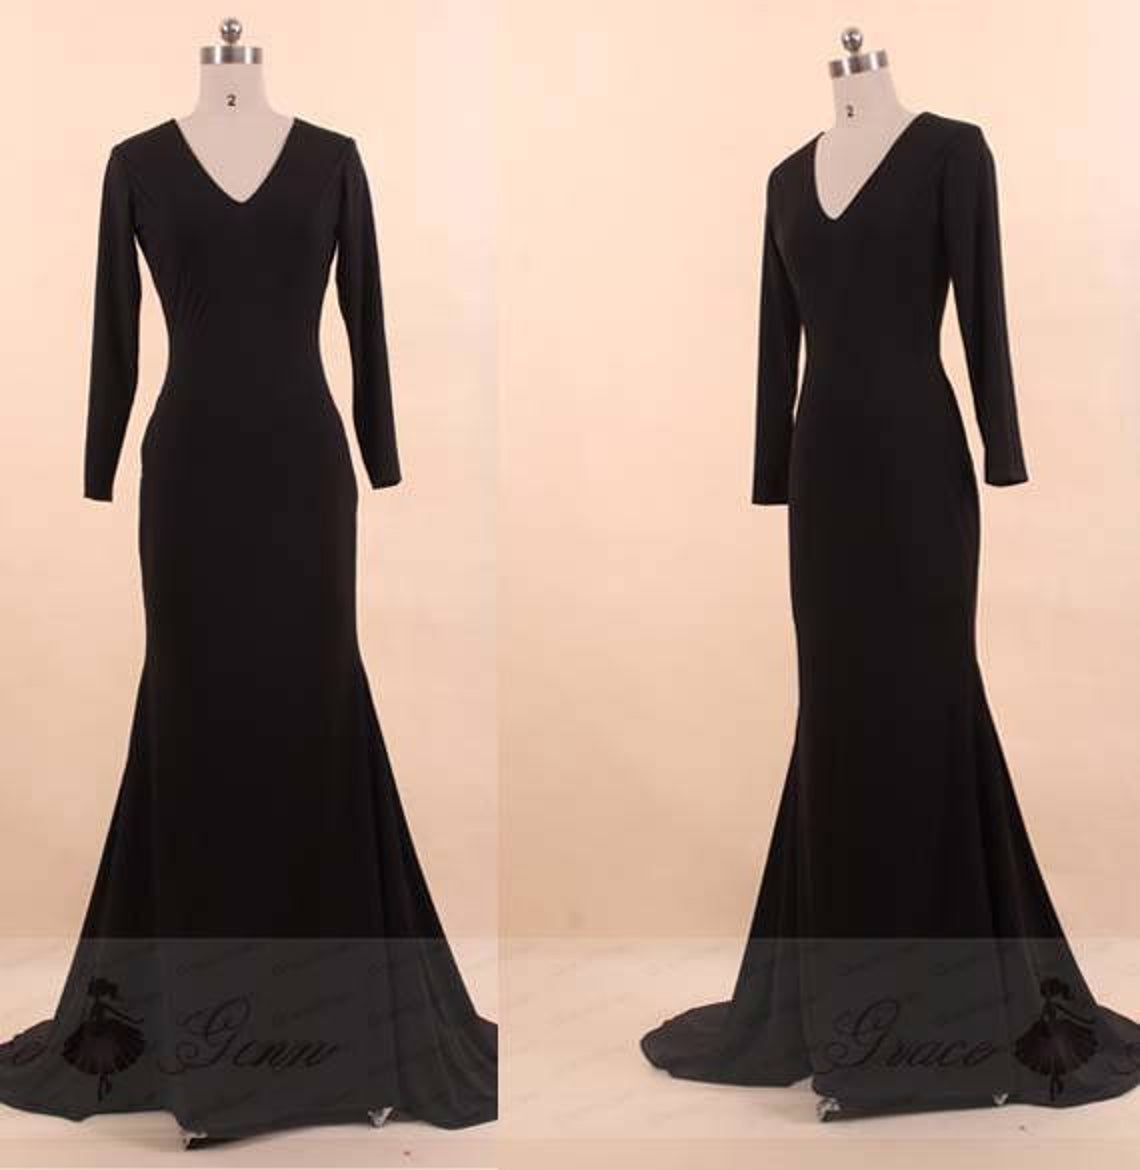 Black Bridesmaid Dress Long Sleeve,sexy Jersey Prom Dress Mermaid,sexy V Neck Wedding Dress With Train,formal Evening Gown Dress,pl2622